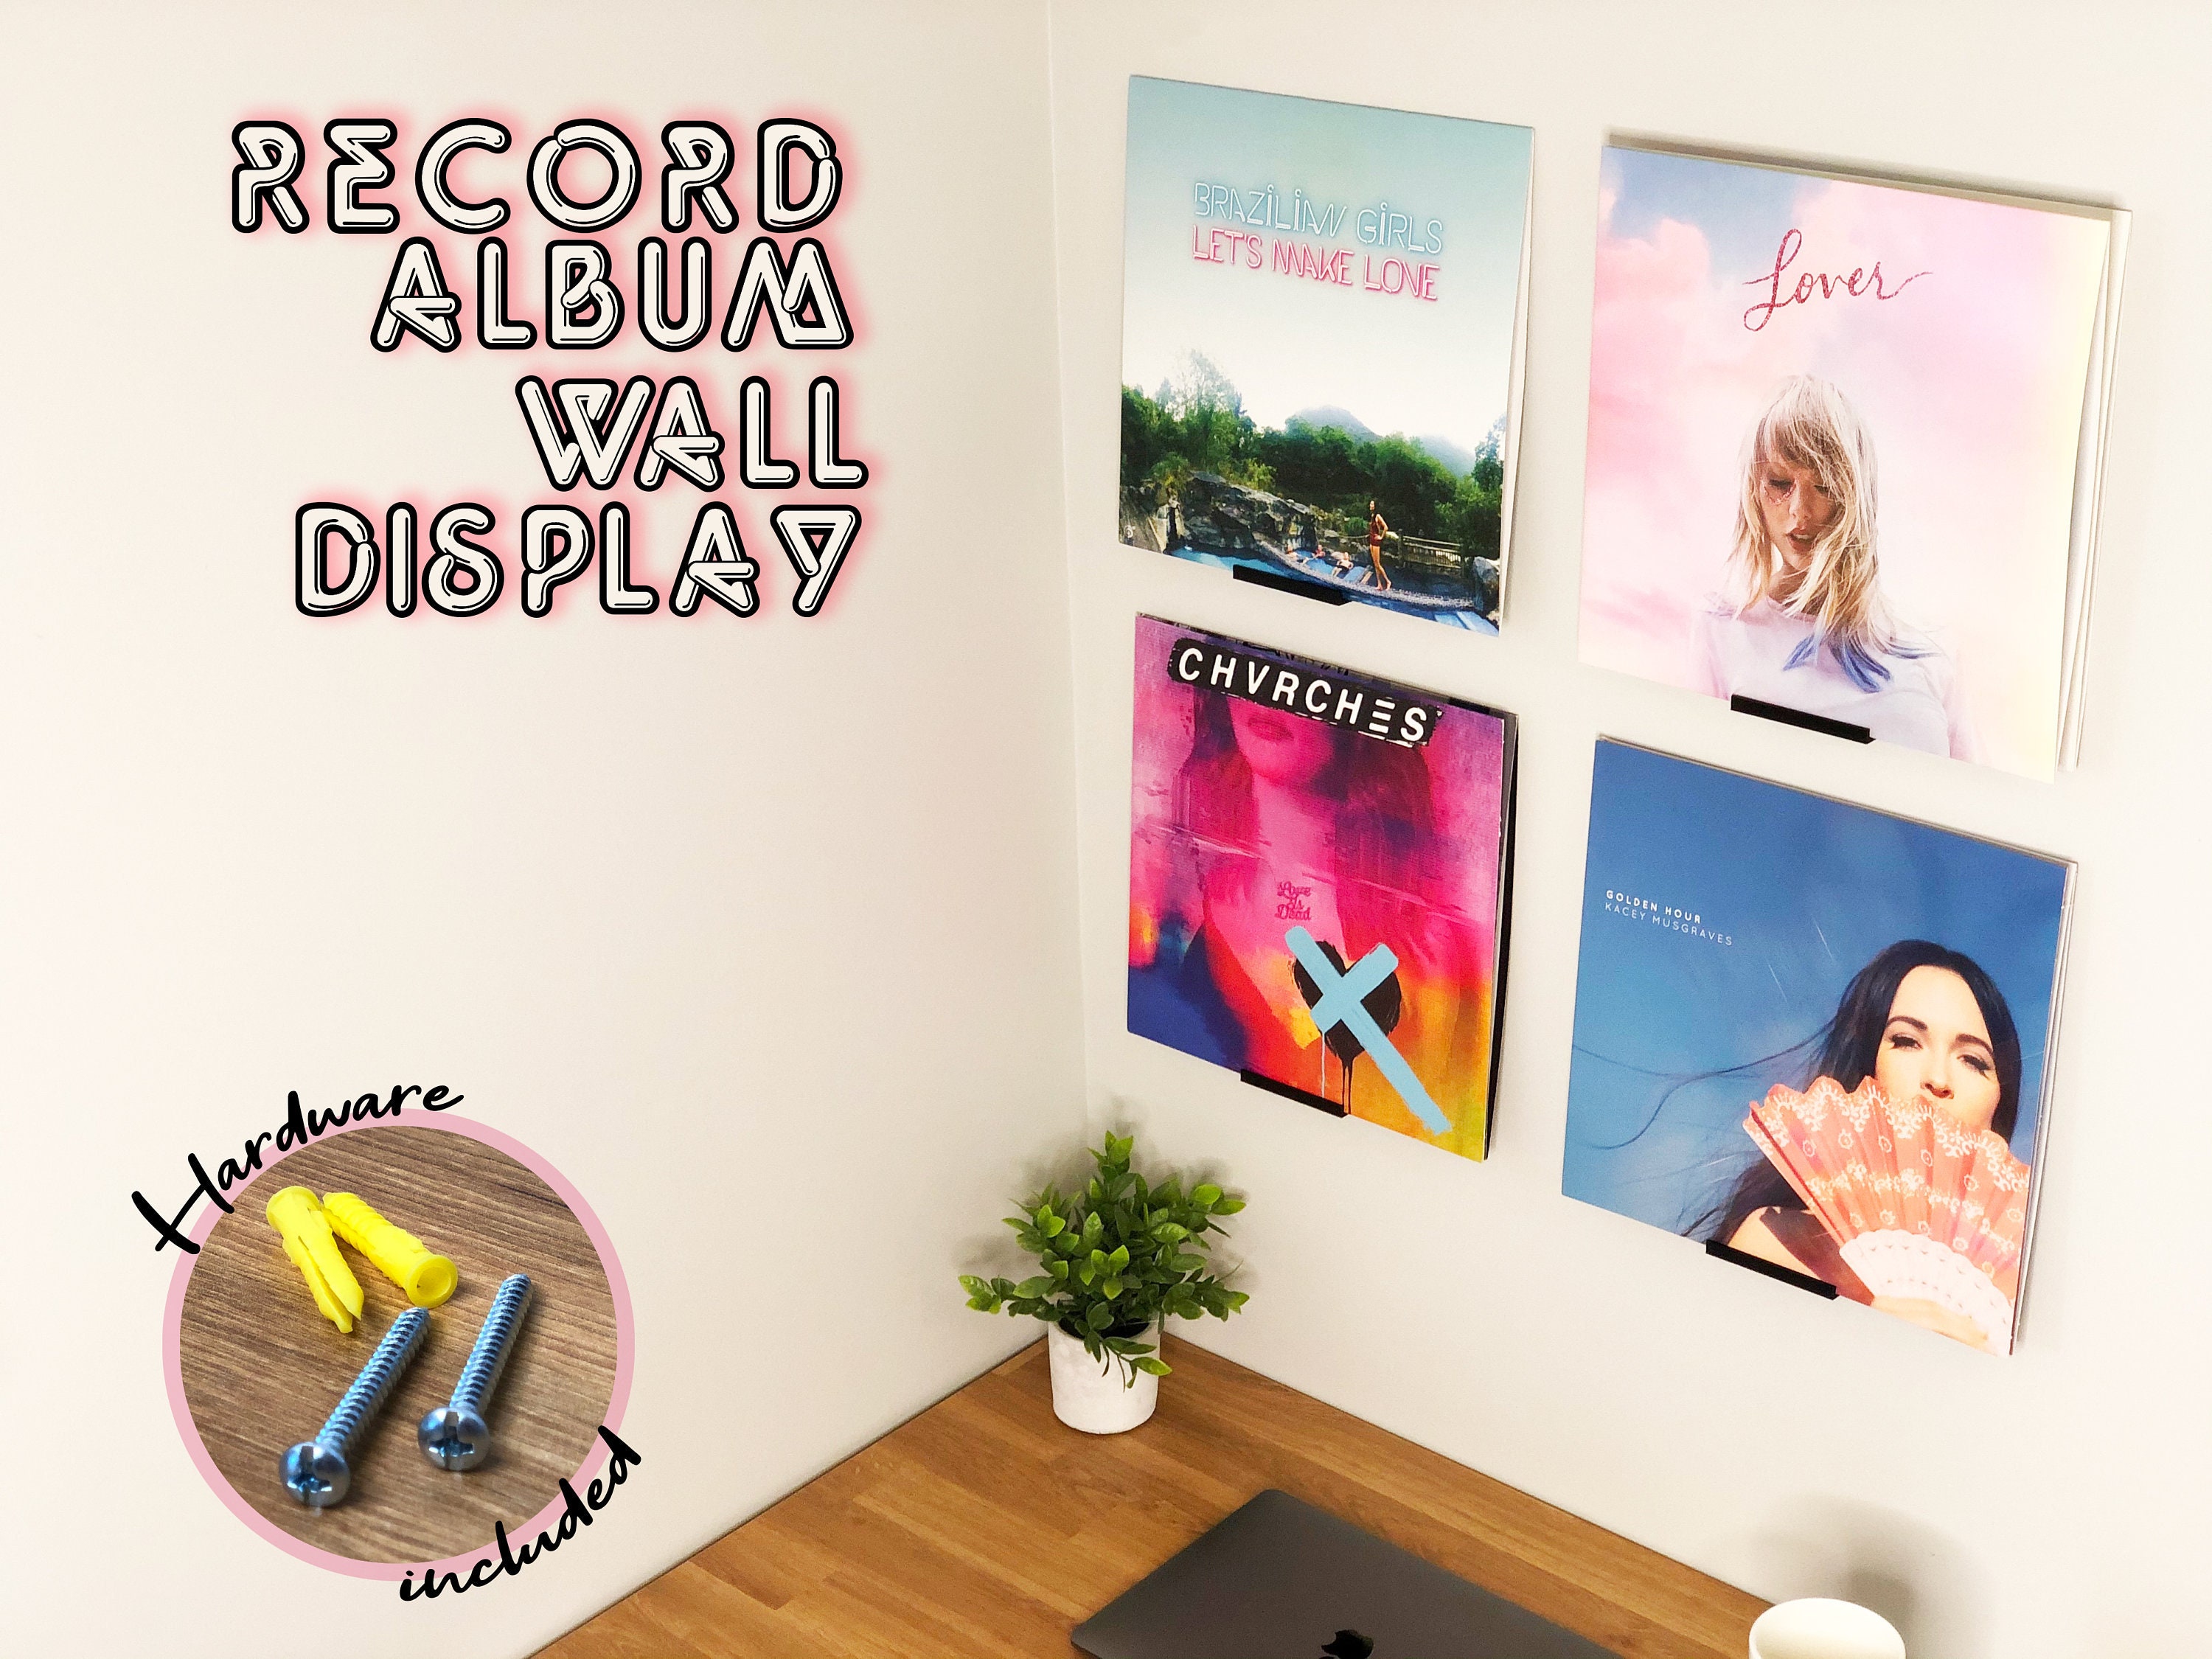 Tapeera Wooden Triangle Vinyl Record Stand Wall Mount - No Drill Wooden  Vinyl Record Holder Accessories - Vinyl Record Display LP Floating Shelf 